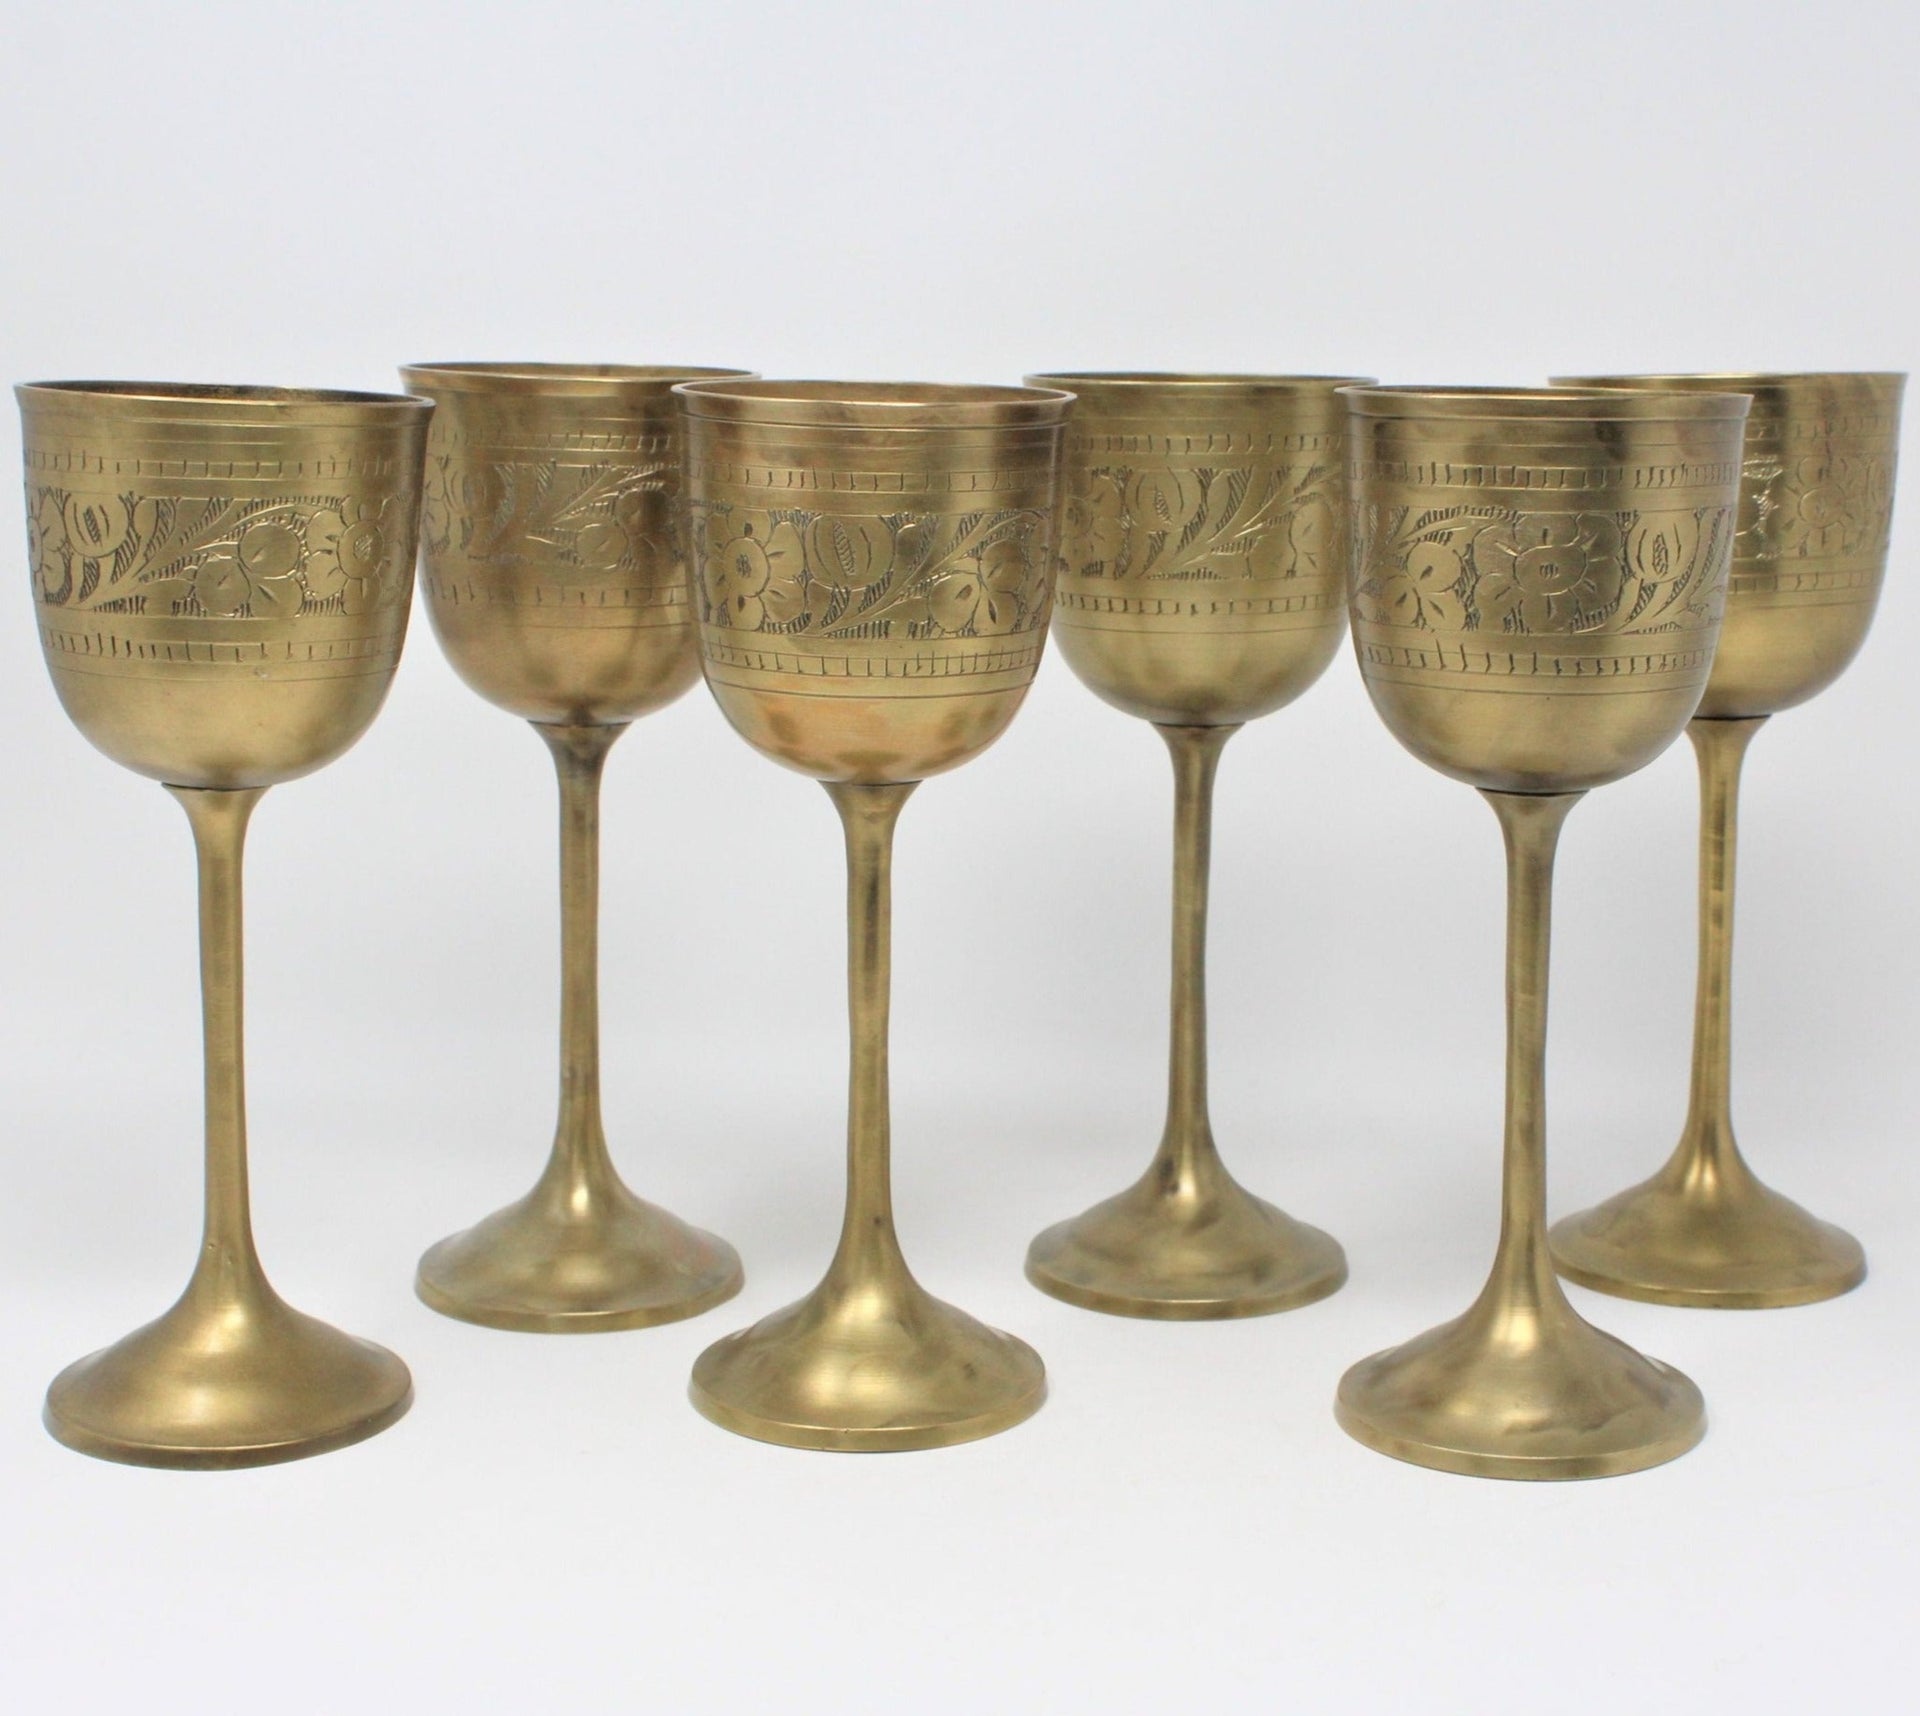 Vintage Mid Century Indian Tall Brass Wine Goblets- Set of 6